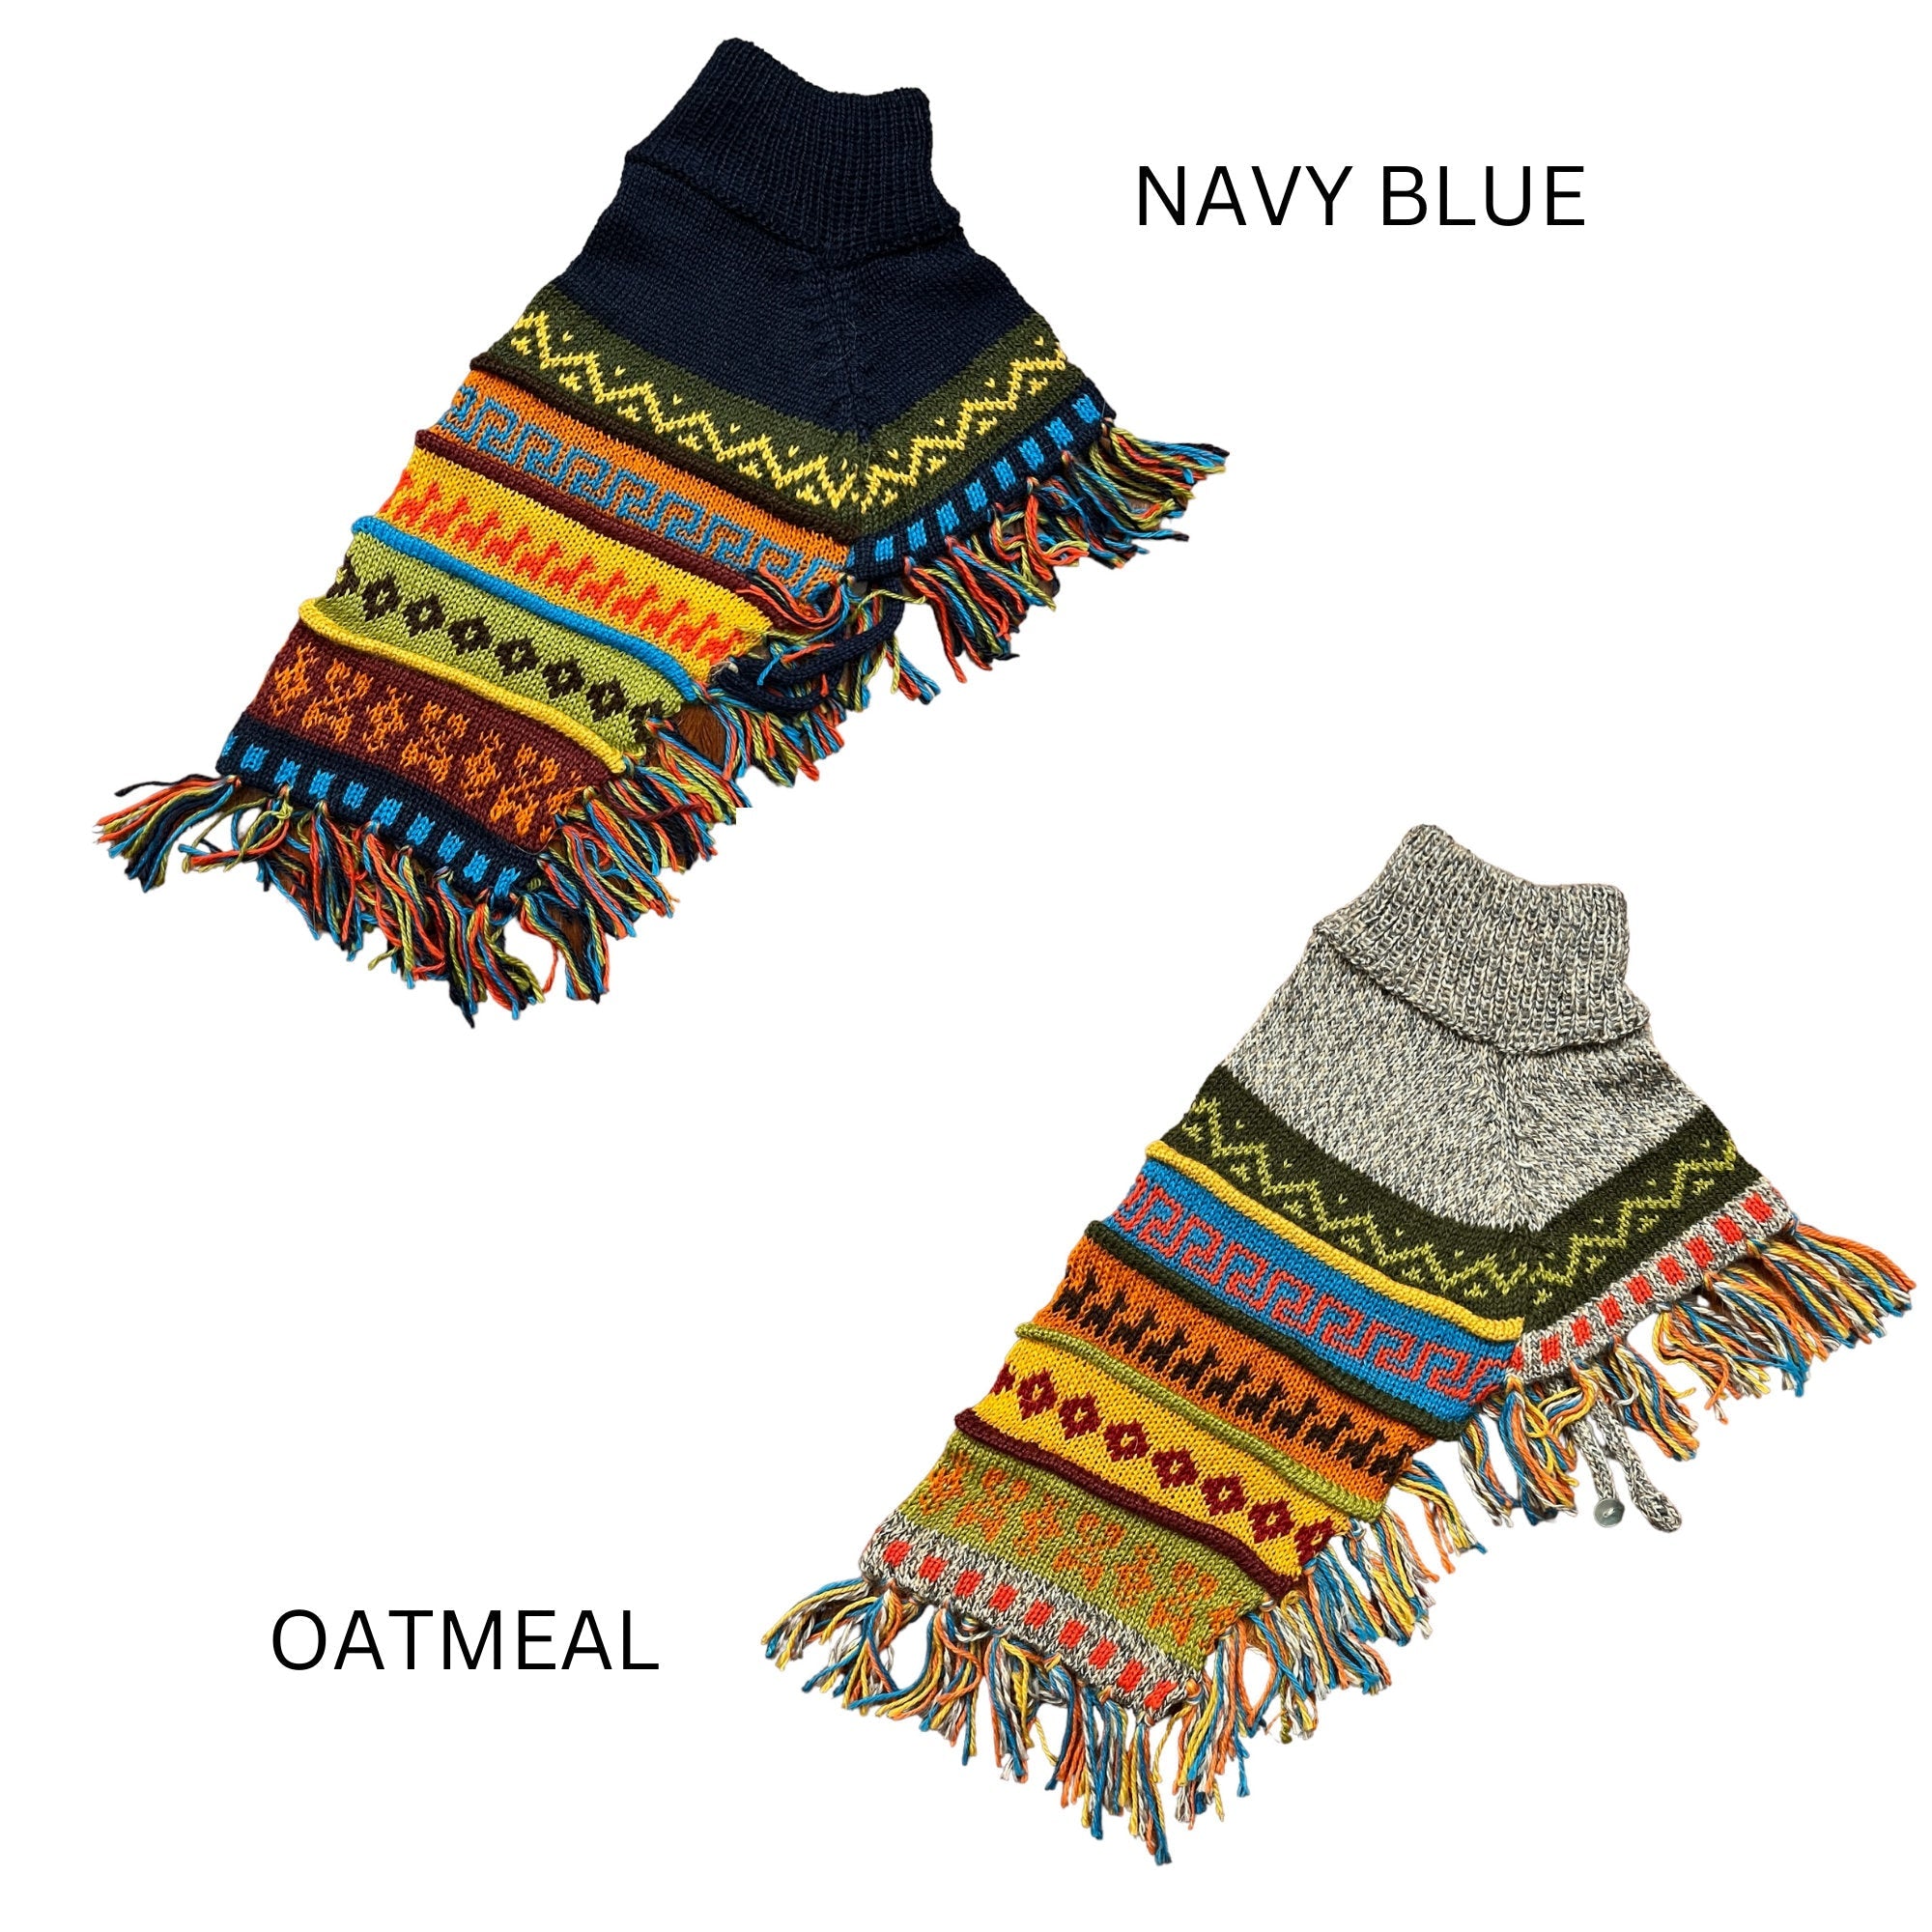 Dog poncho. Handmade in the Andes of Peru with baby Alpaca wool